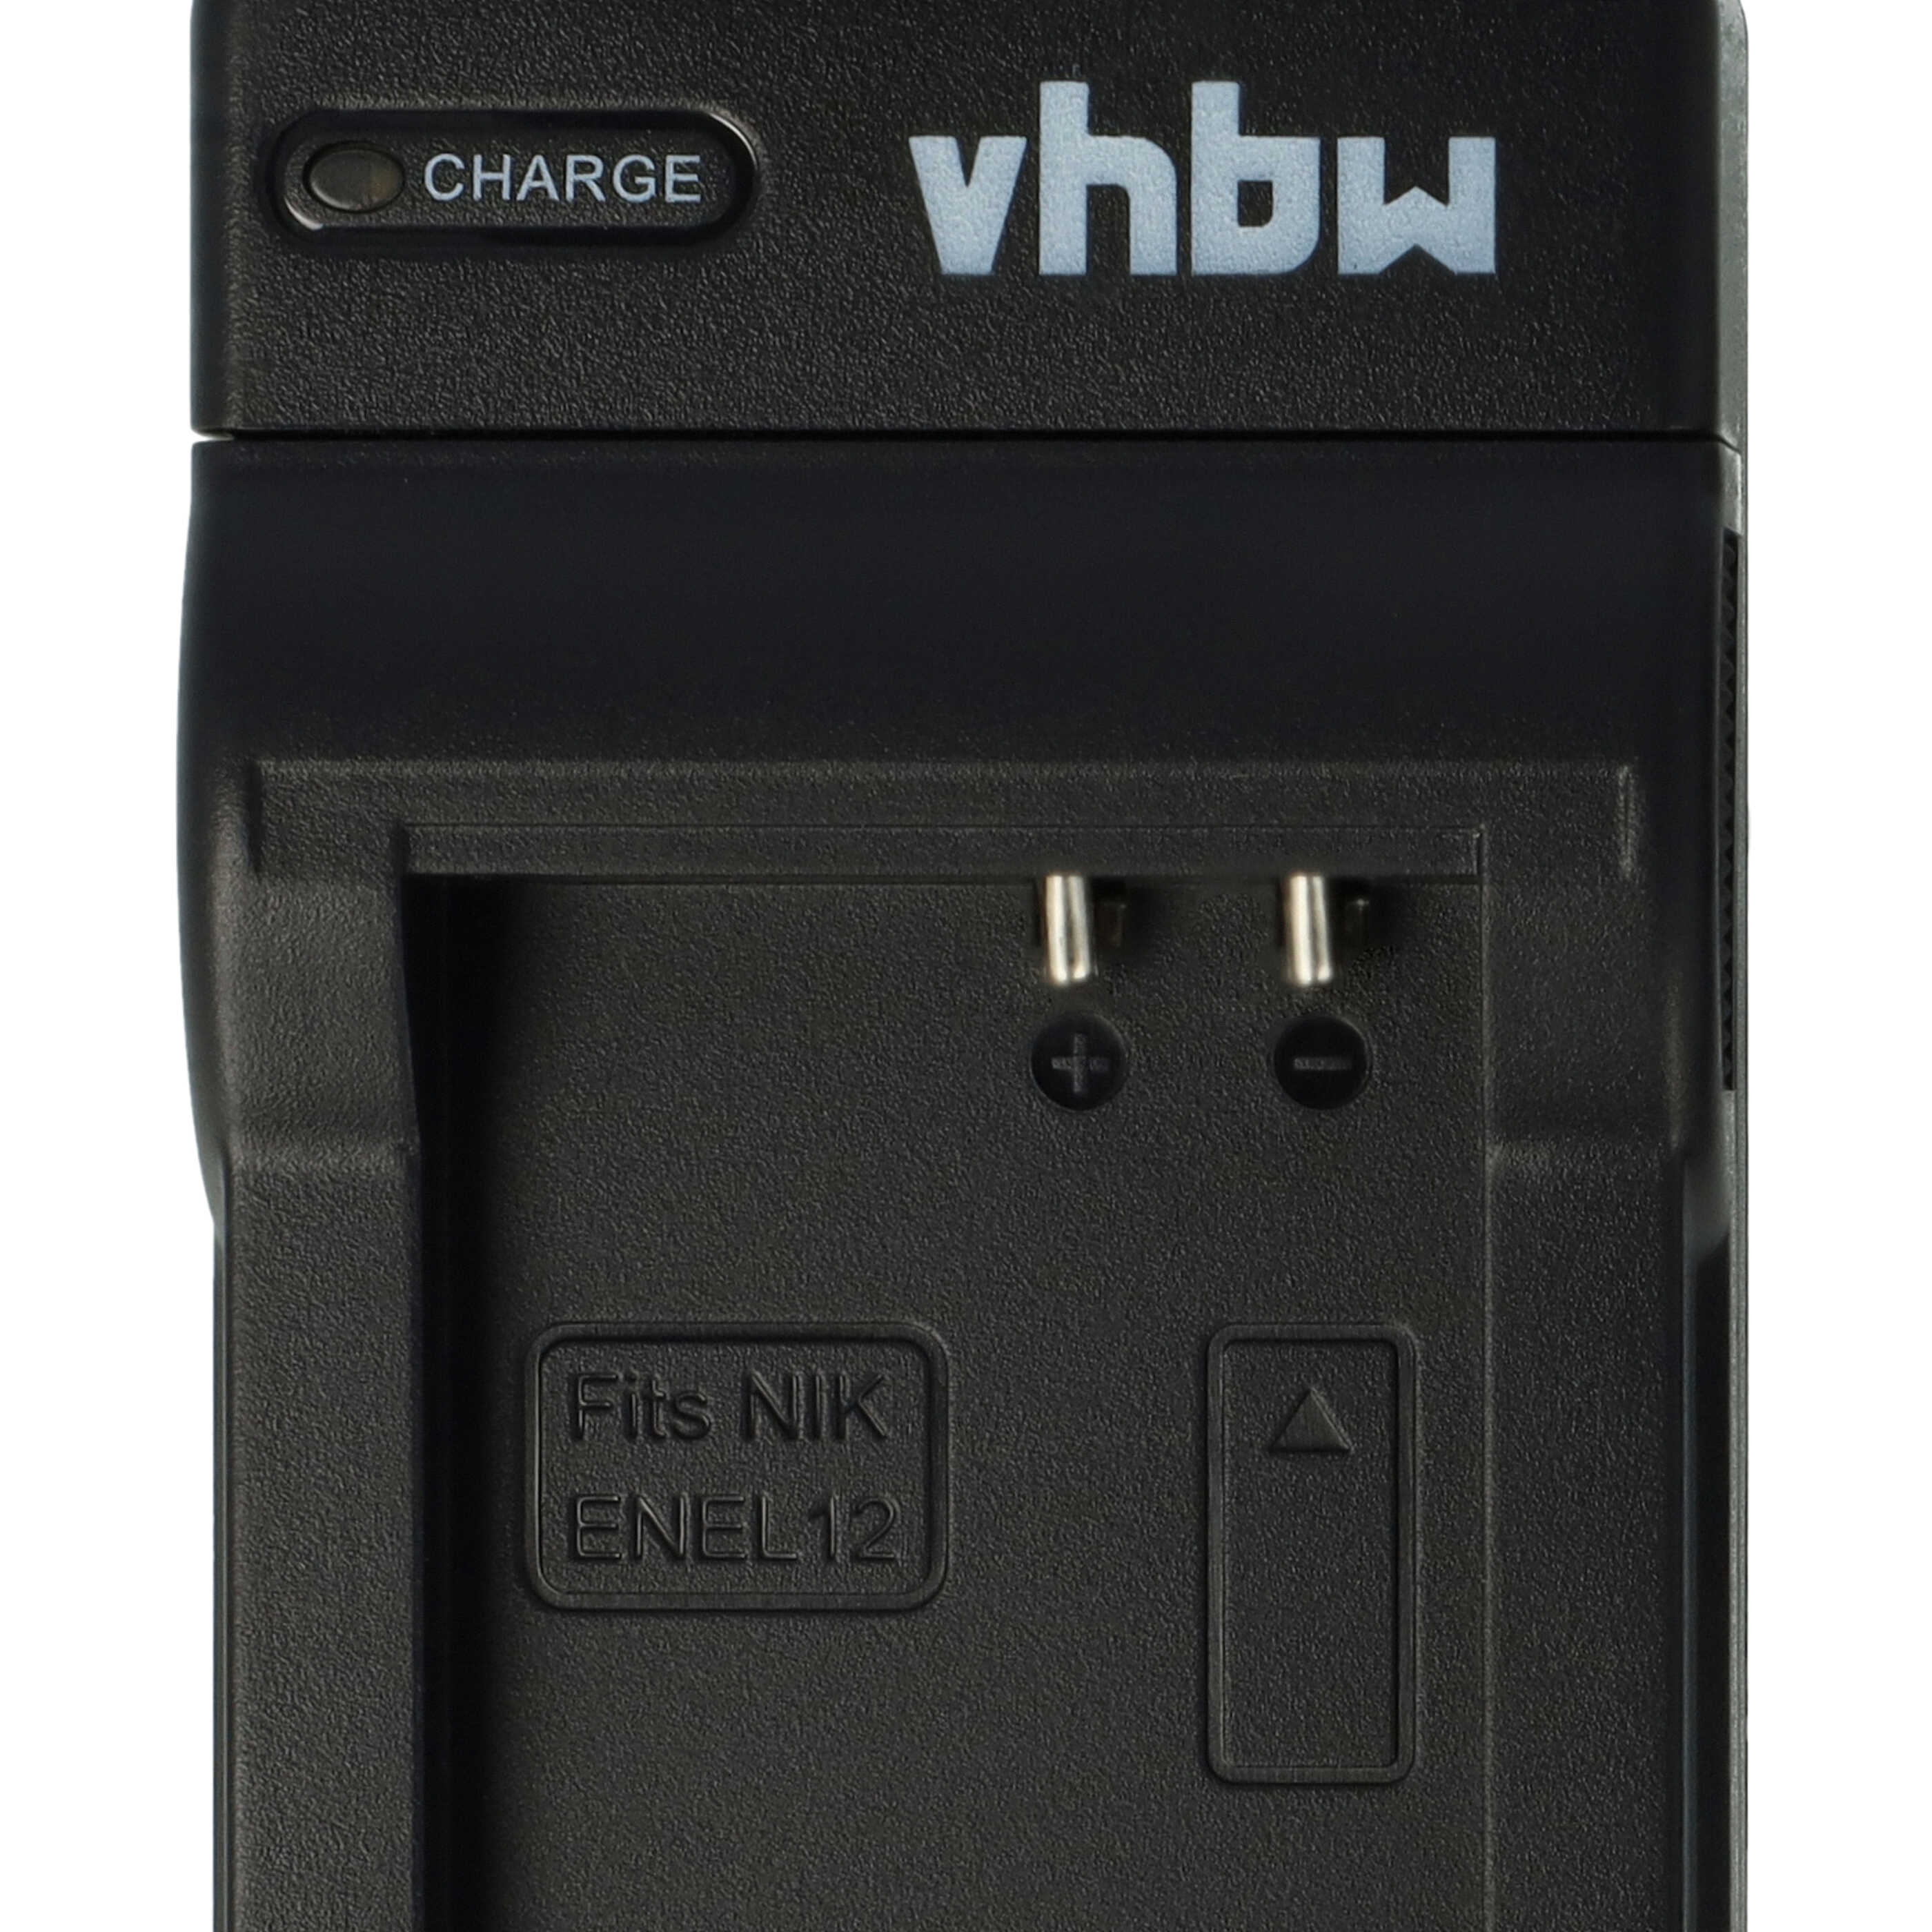 Battery Charger suitable for Keymission 170 Camera etc. - 0.5 A, 4.2 V